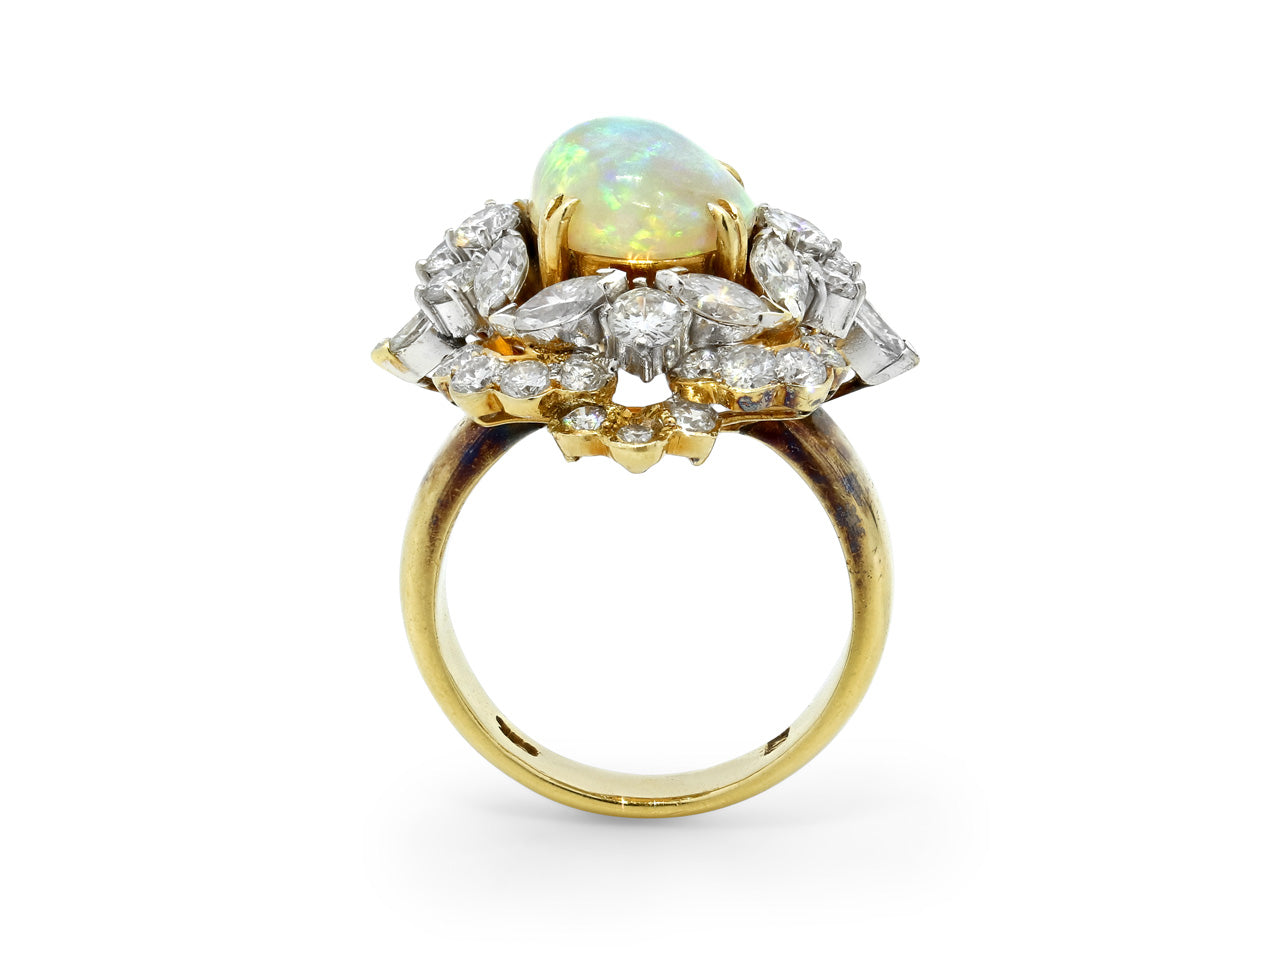 White Opal and Diamond Ring in 18K Gold